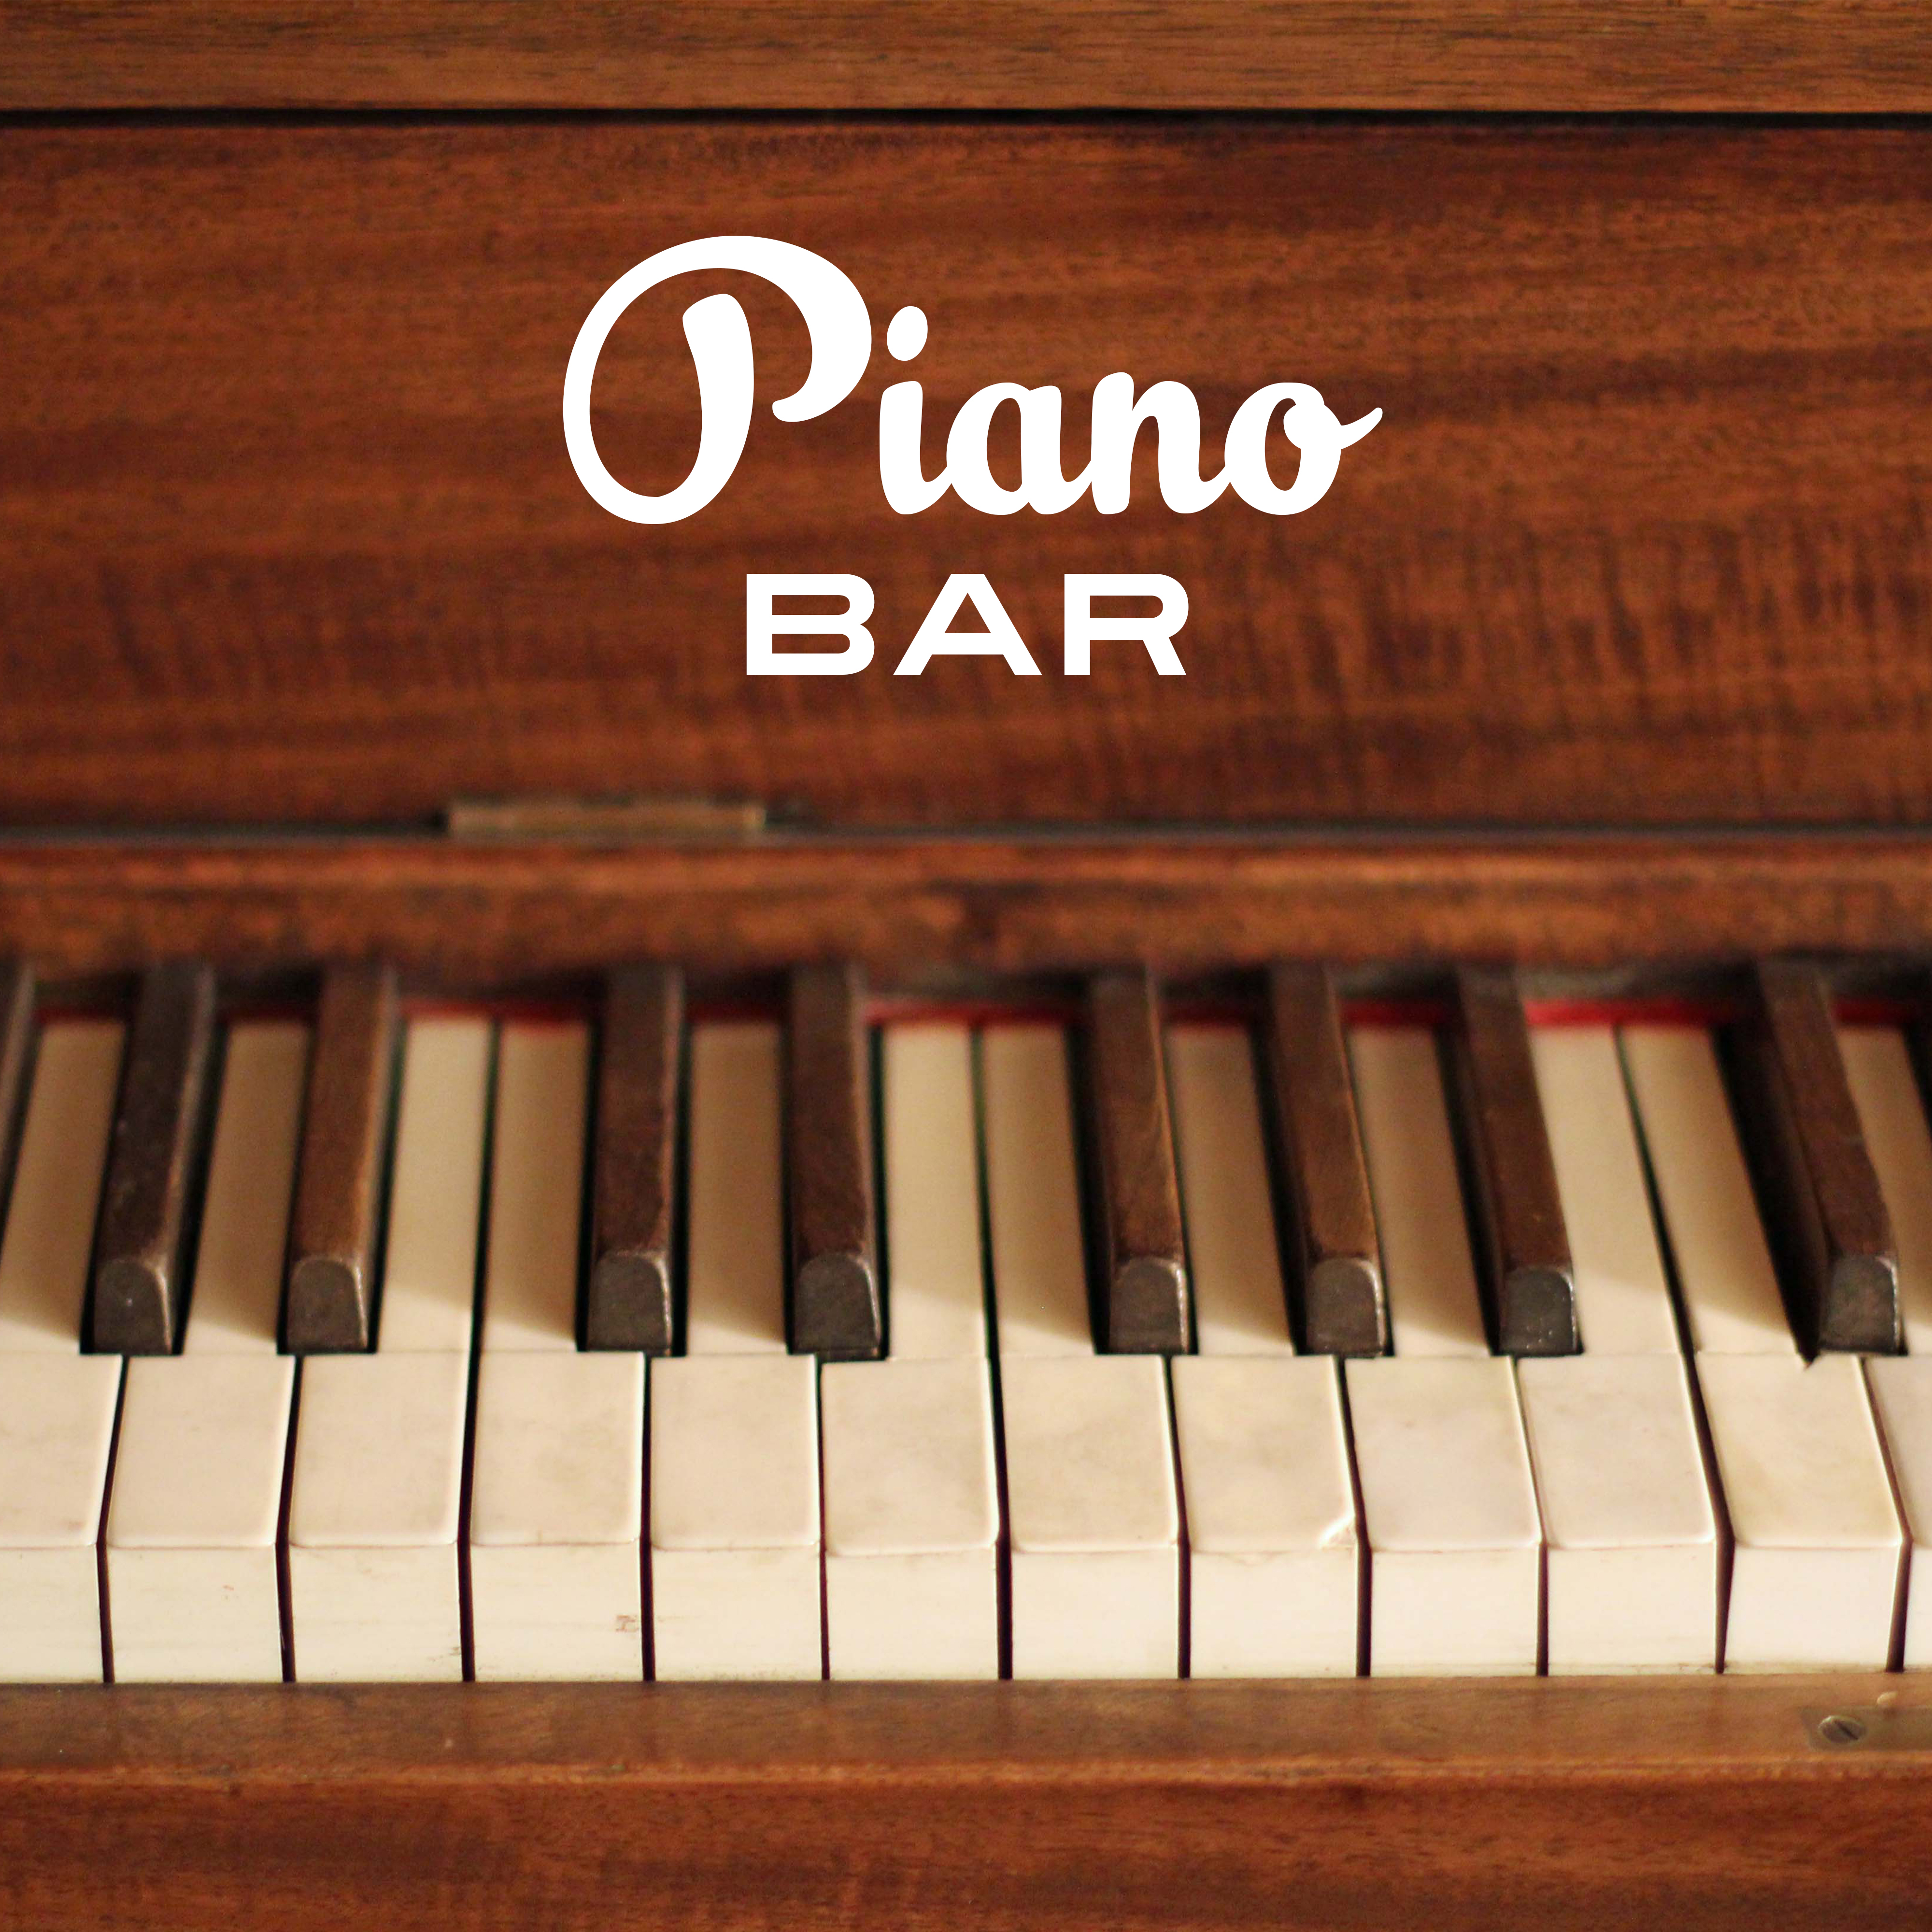 Piano Bar – Restaurant Jazz, Cafe Music, Smooth Jazz for Relaxation, Stress Relief, Ambient Music, Calm Down